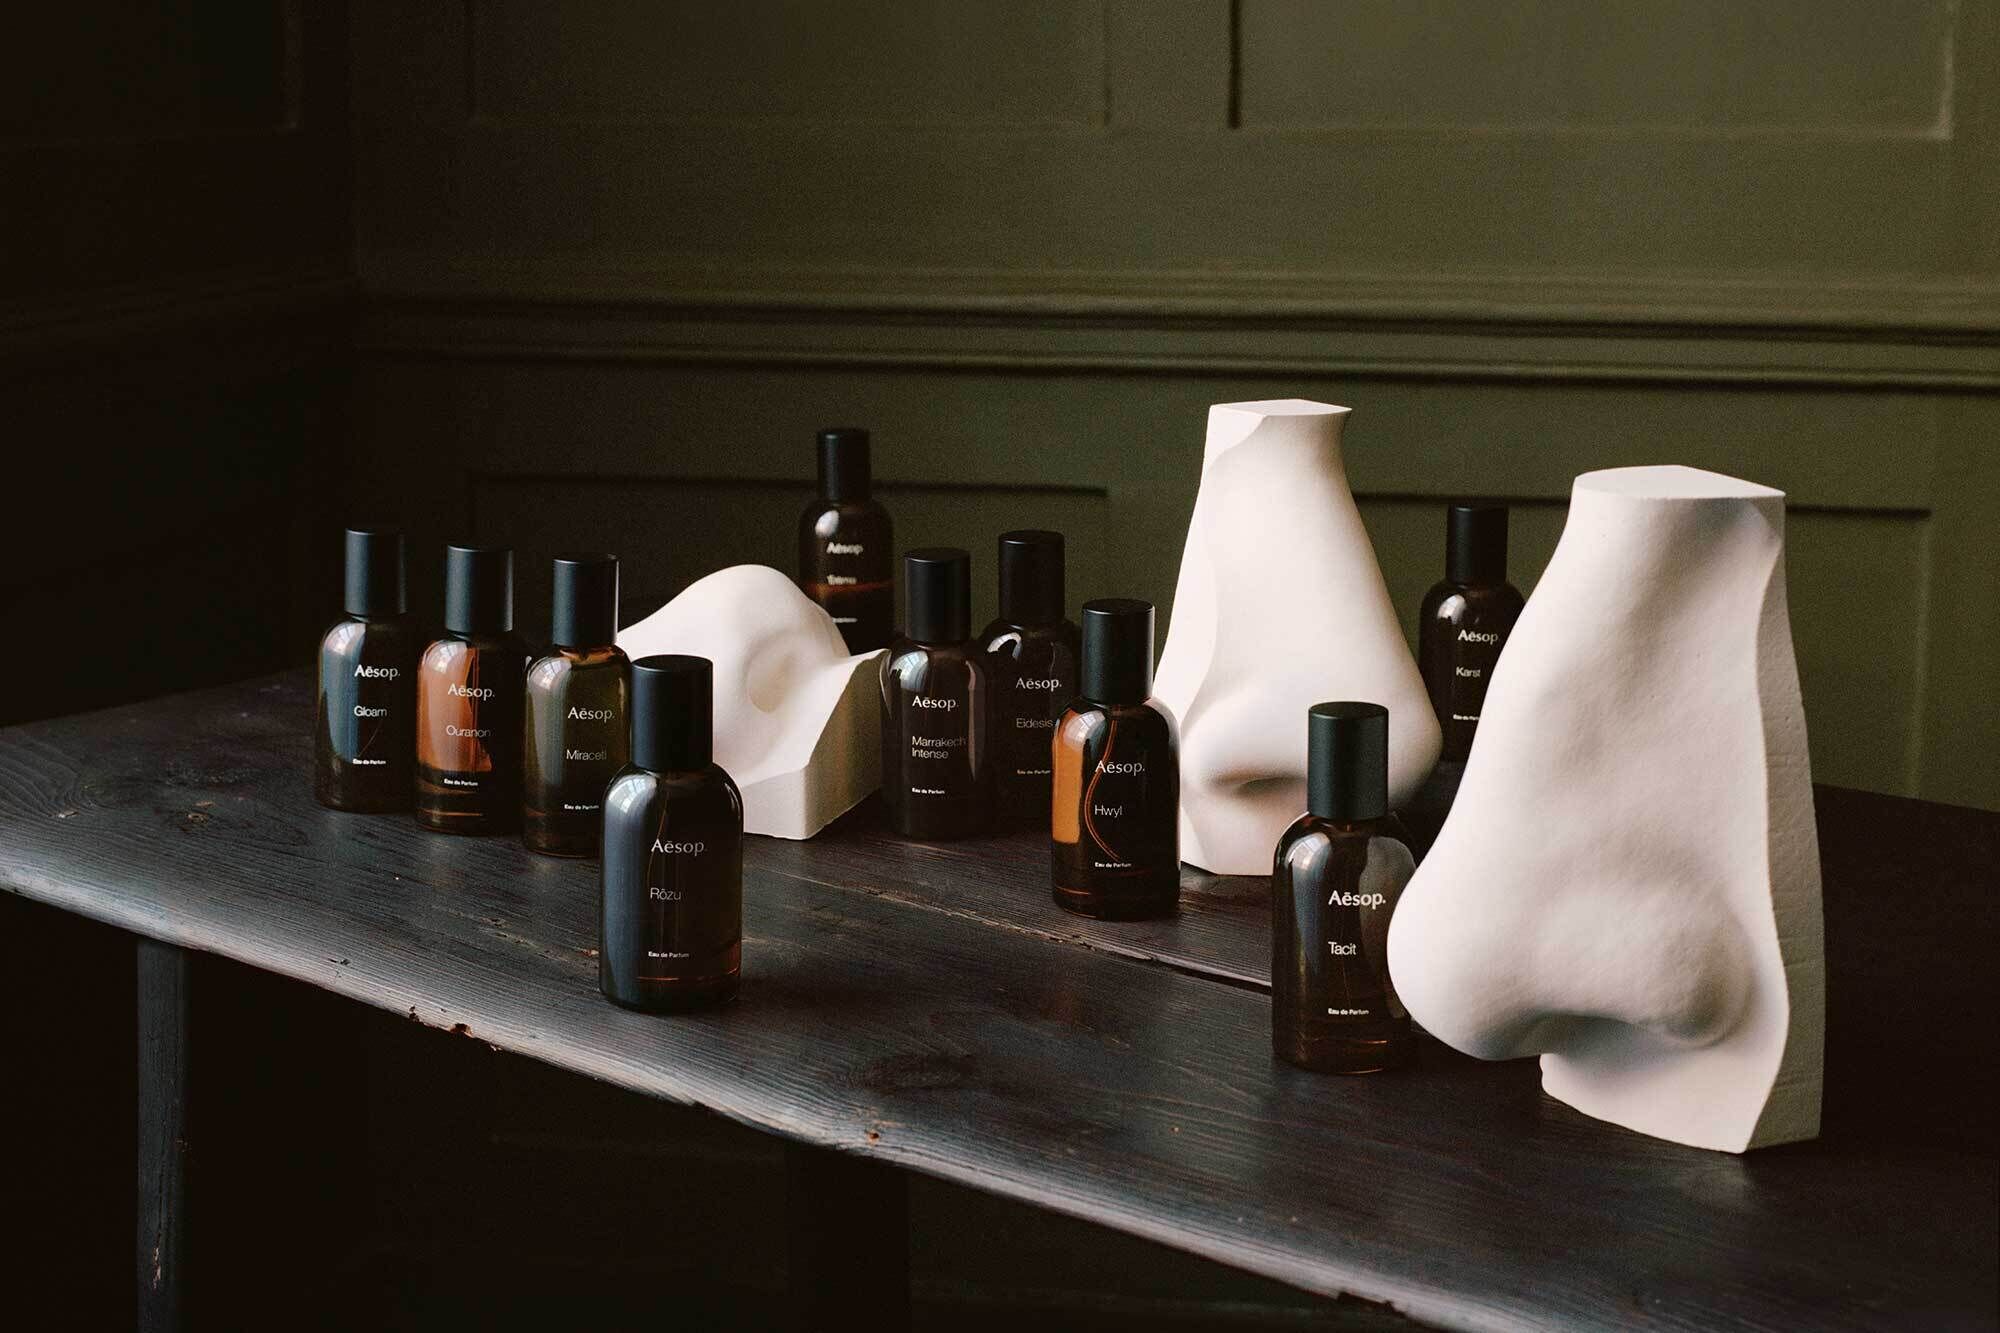 Perfume bottles sit on a counter alongside plaster sculptures of noses.